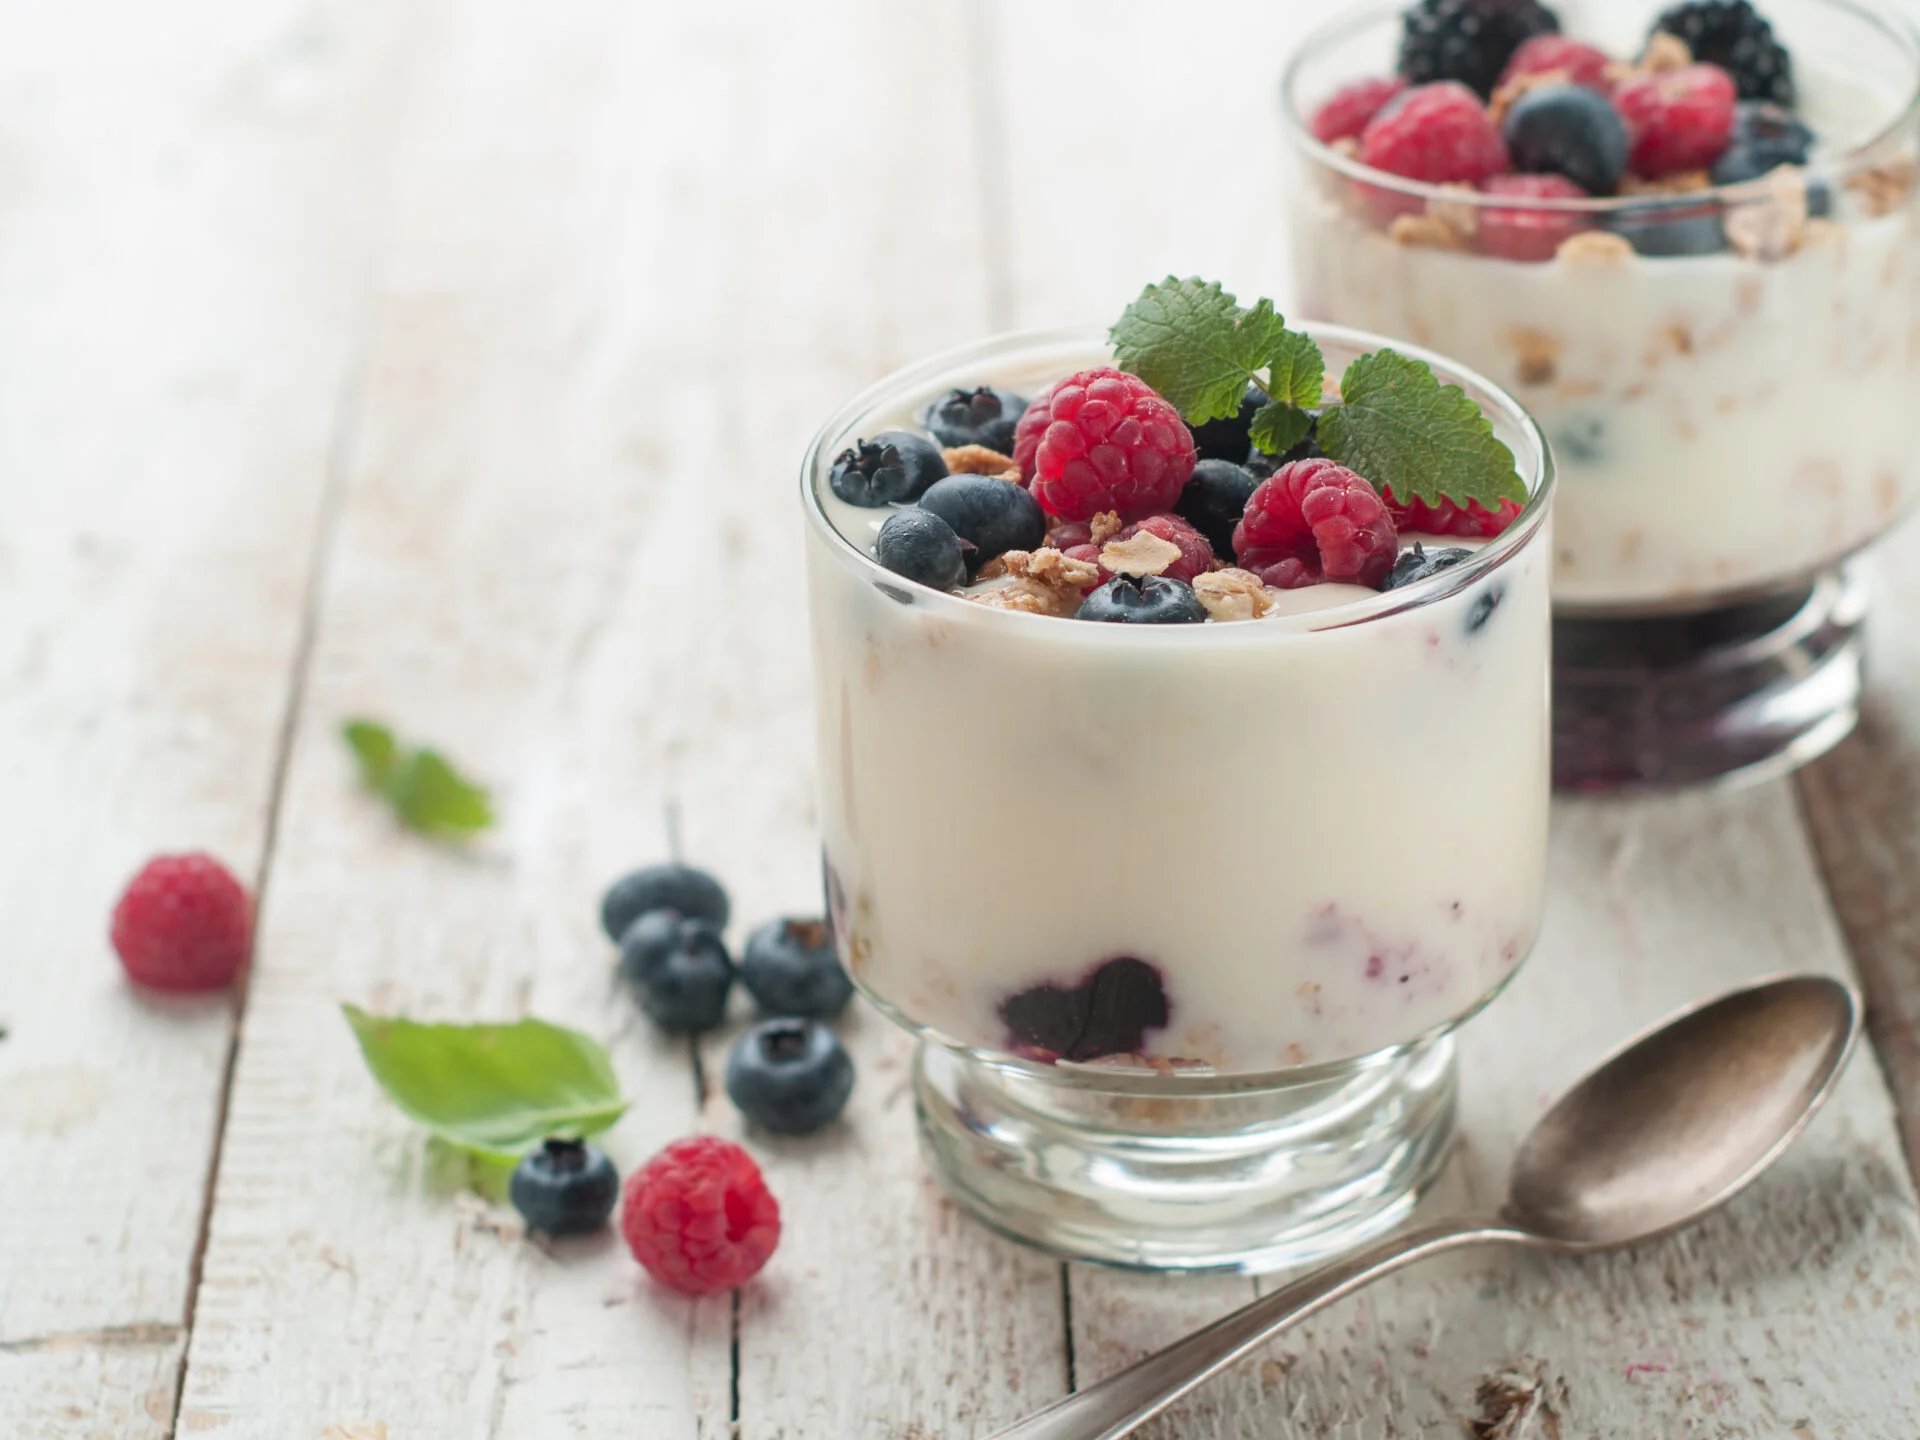 Yogurt with granola or muesli and fresh berries for healthy morning meal